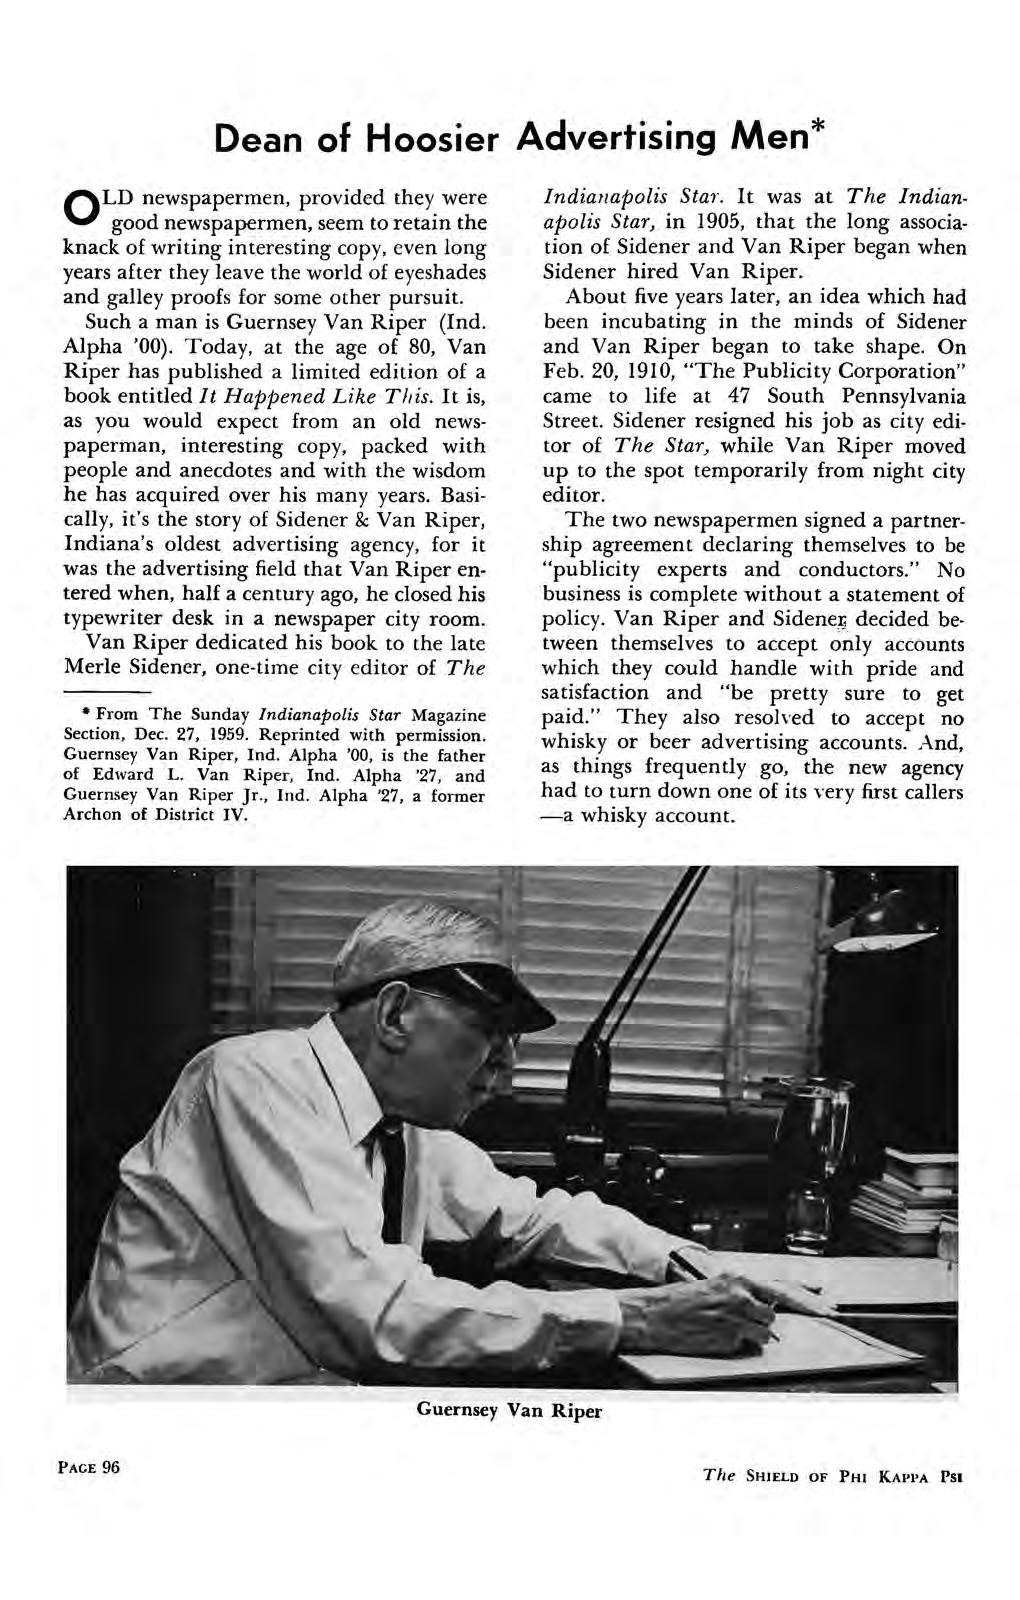 Dean of Hoosier Advertising Men' OLD newspapermen, provided they were good newspaj>ermen, seem to retain the knack of writing interesting copy, even long years after they leave the world of eyeshades